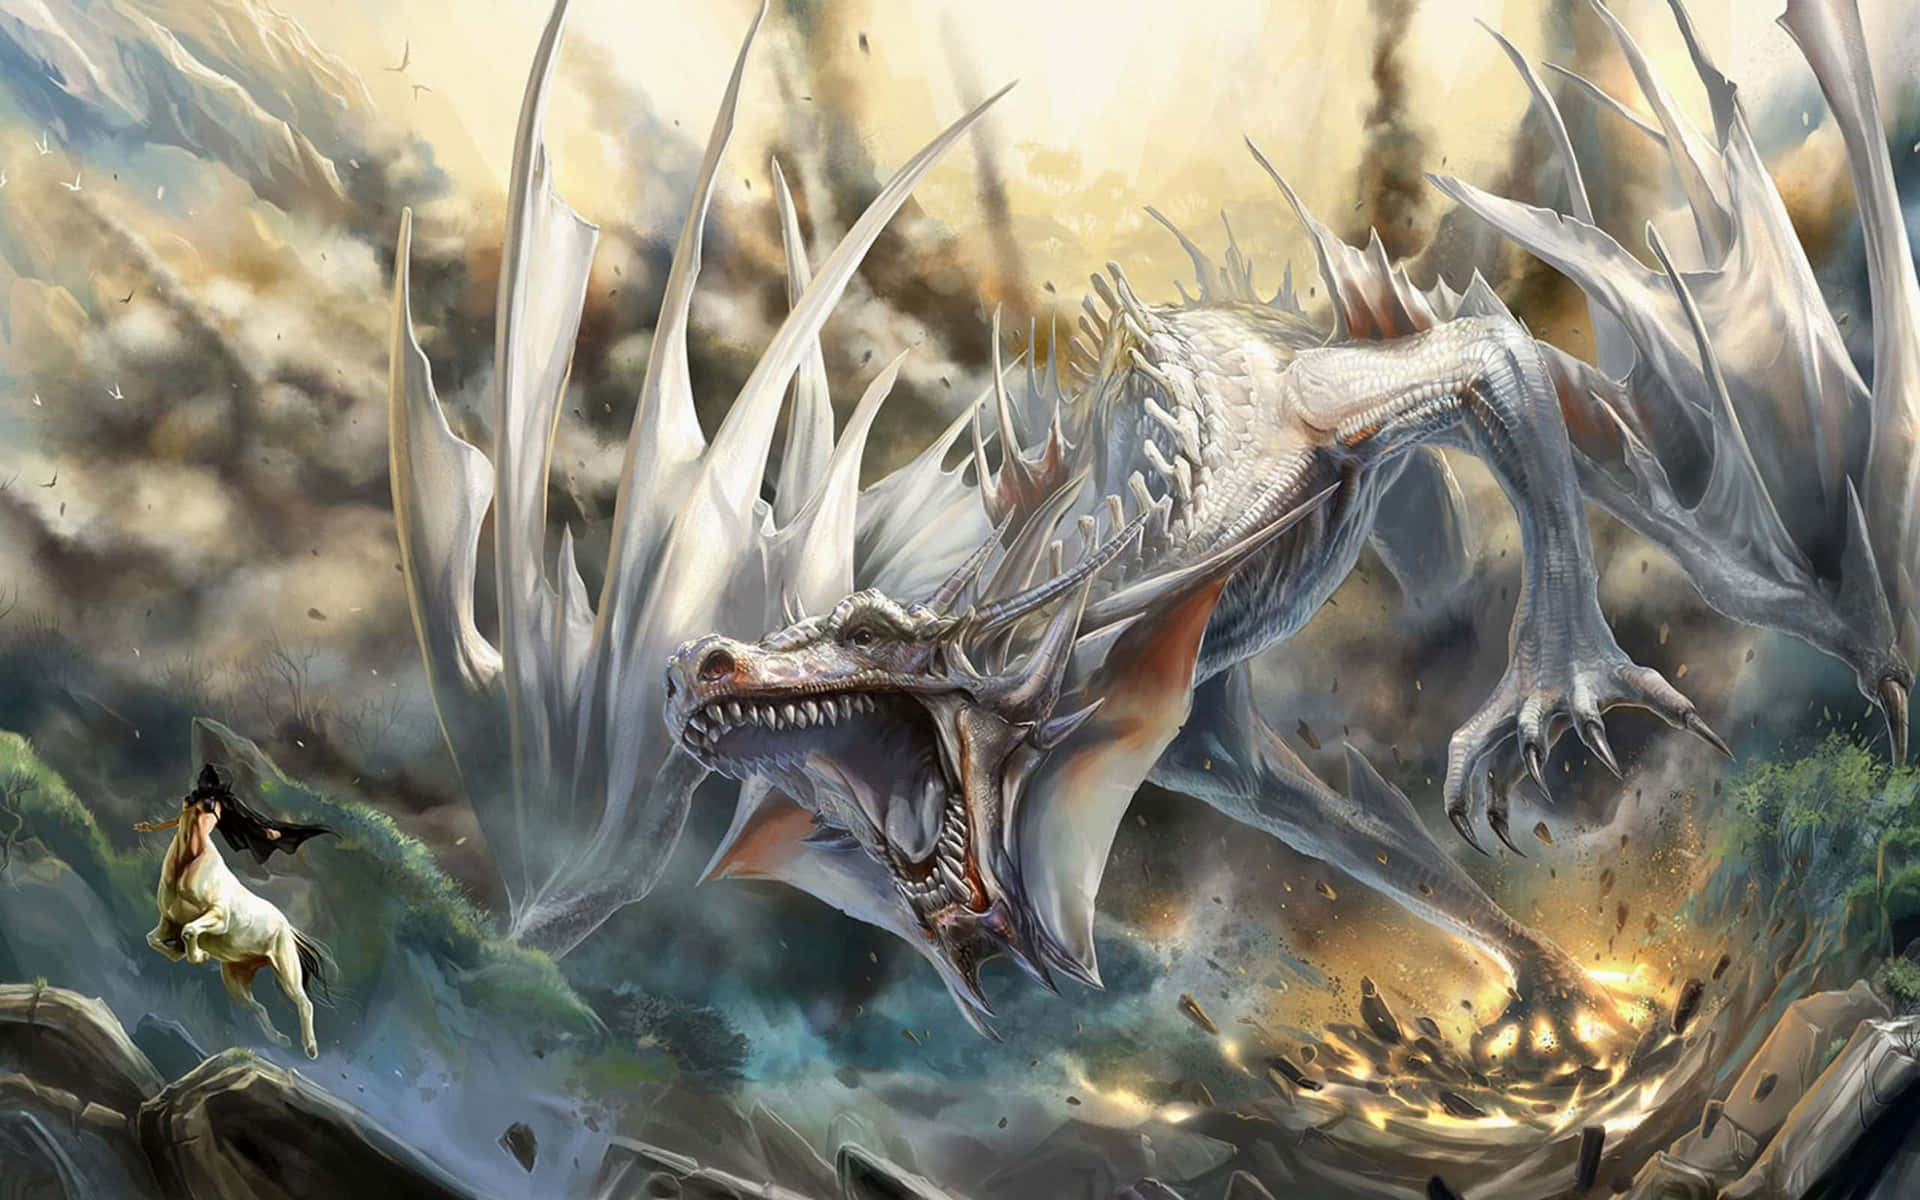 Amazing scene of a Beautiful Dragon with wings spread Wallpaper